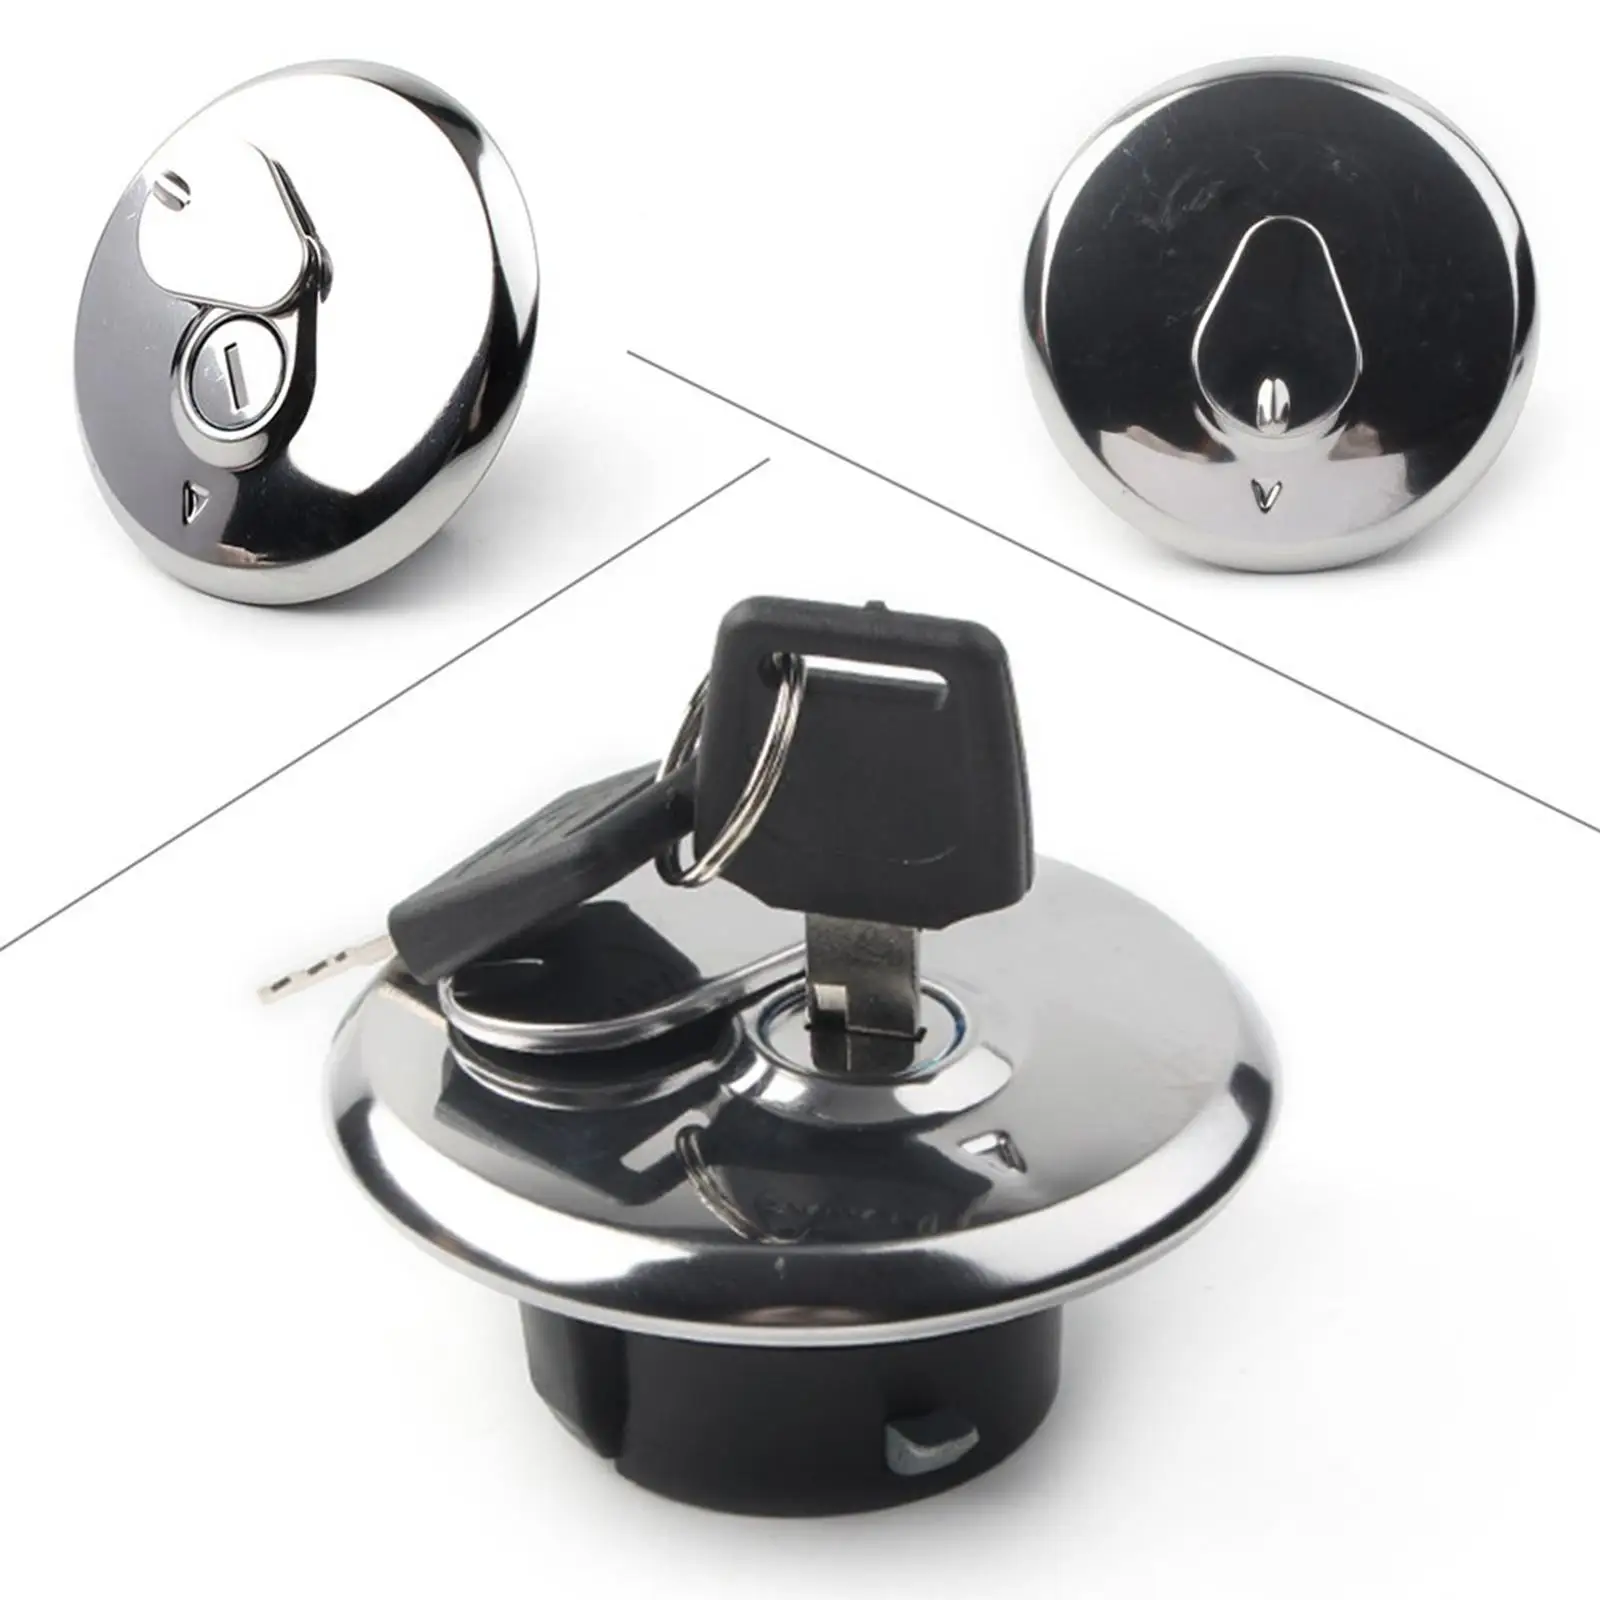 Aluminum Alloy Motorcycle Fuel Gas Tank Cap Cover Replaces for Suzuki Gn125